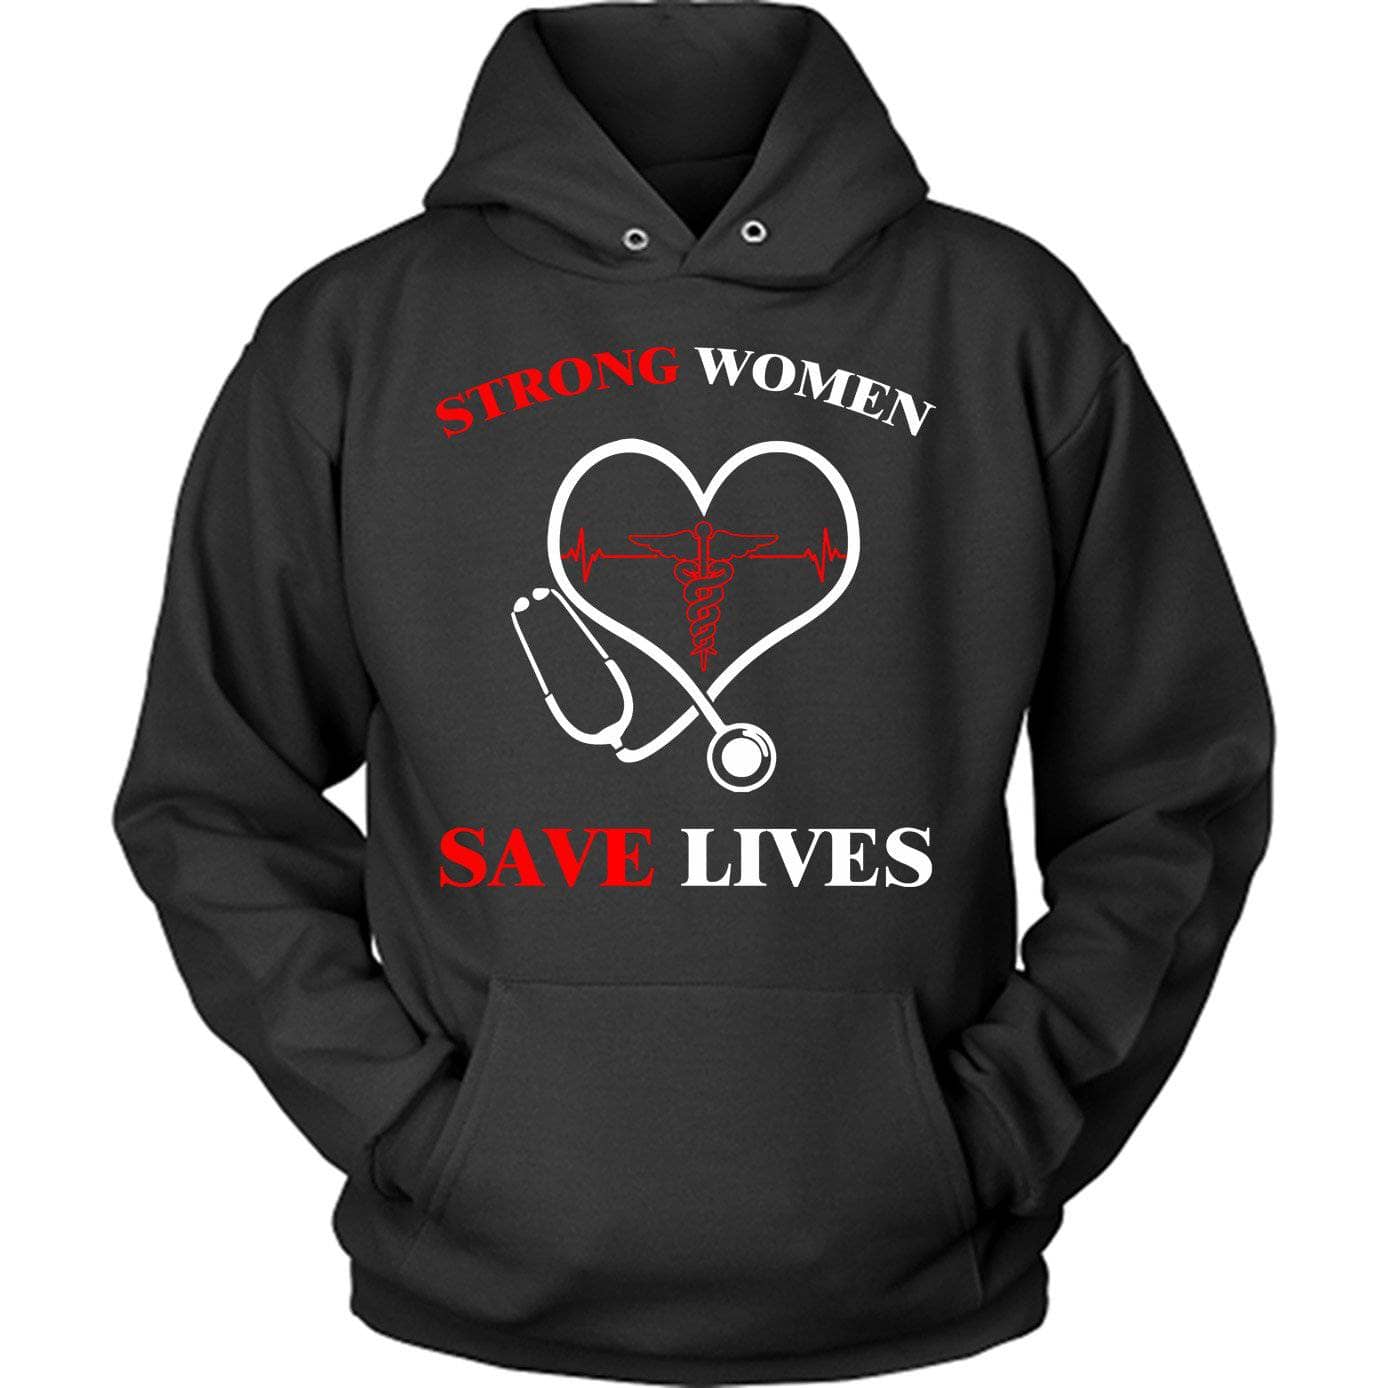 Strong Women Save Lives Hoodie